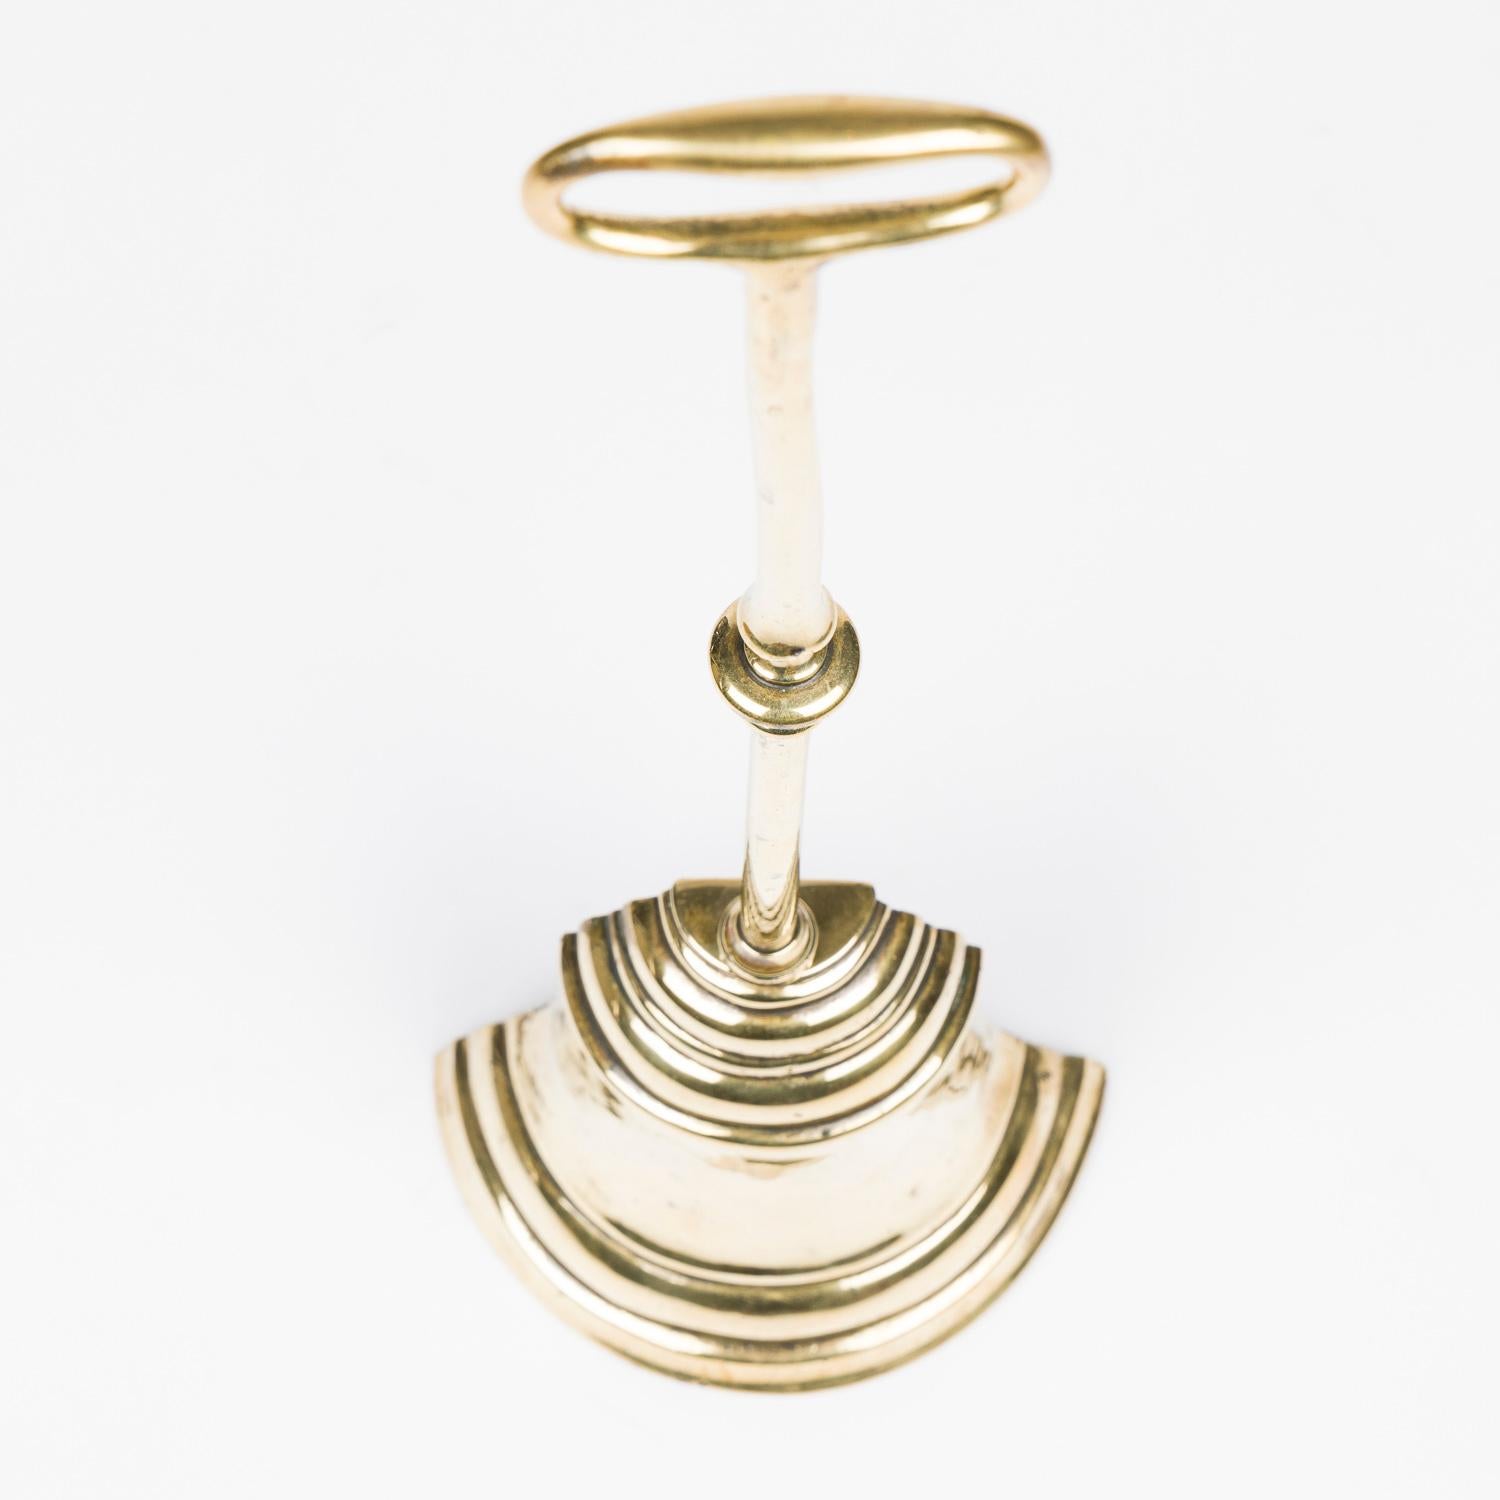 A mid 19th century brass bell shaped door porter.

With weight base.

Weight: 6.2 lbs.